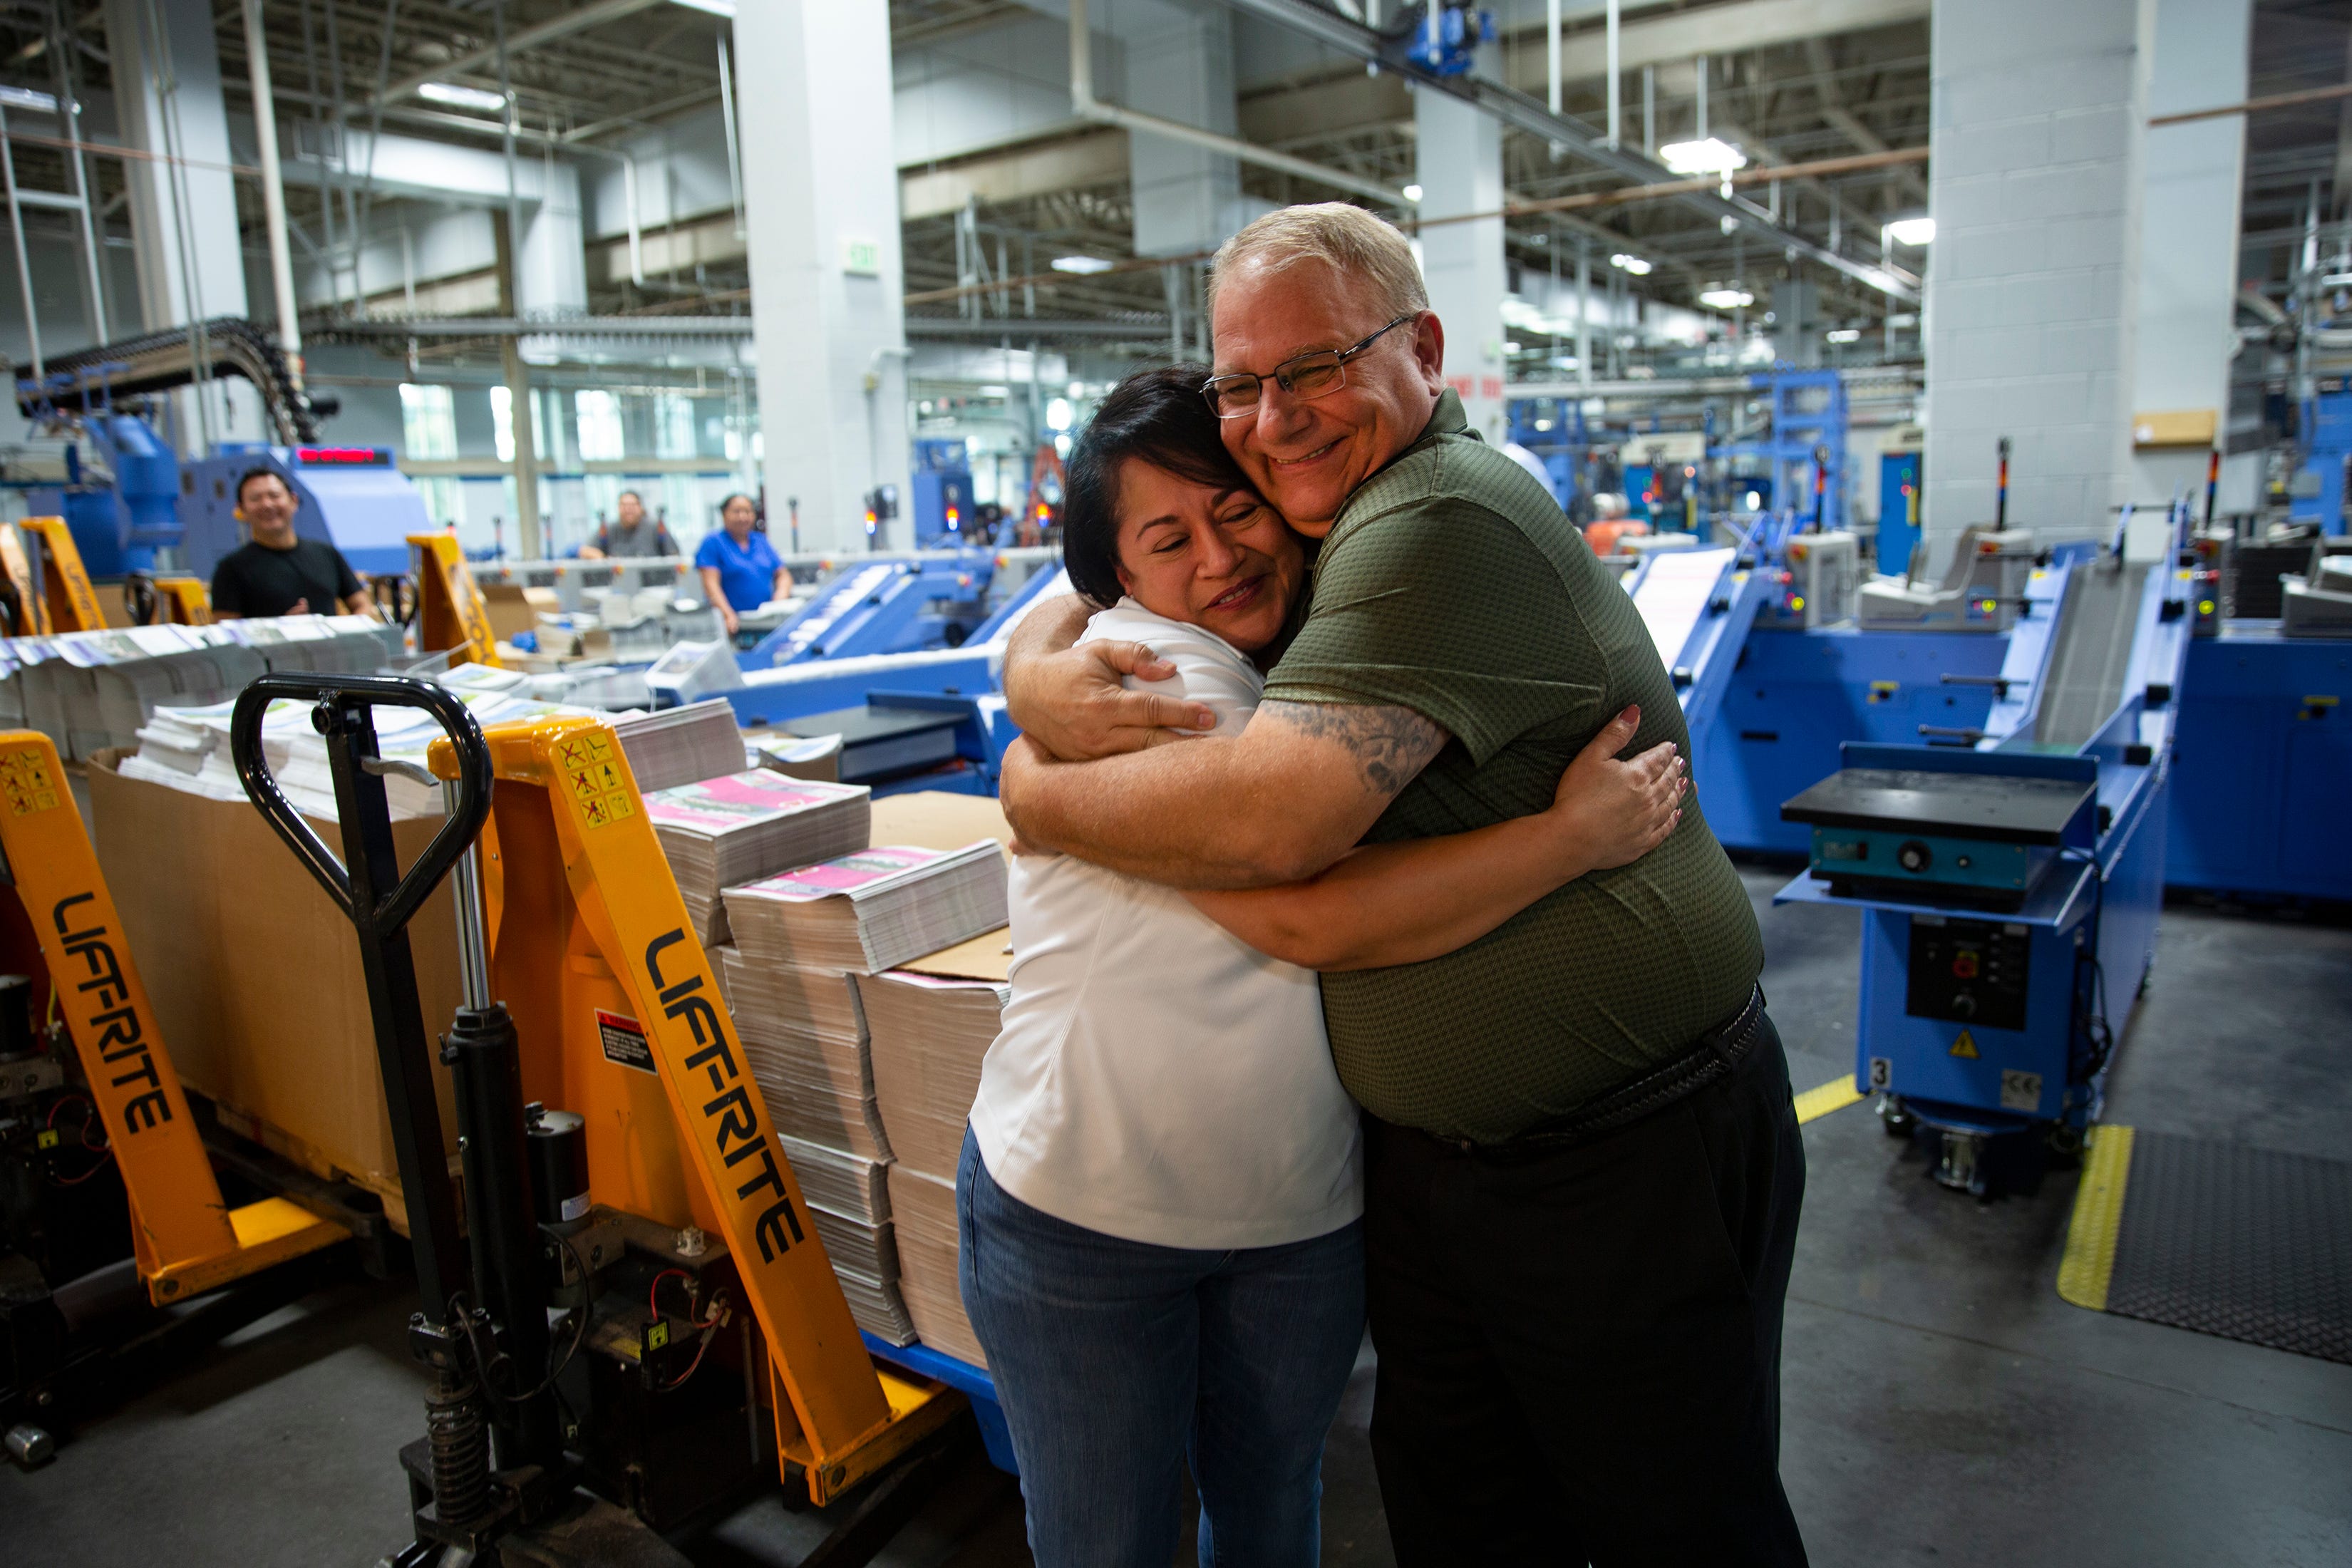 Naples Daily News Associate Mailroom Manager Gloria Taylor receives a hug from Operations Manager Jim Zajas,  Thursday, Feb. 6, 2020, at the Naples Daily News building in North Naples.